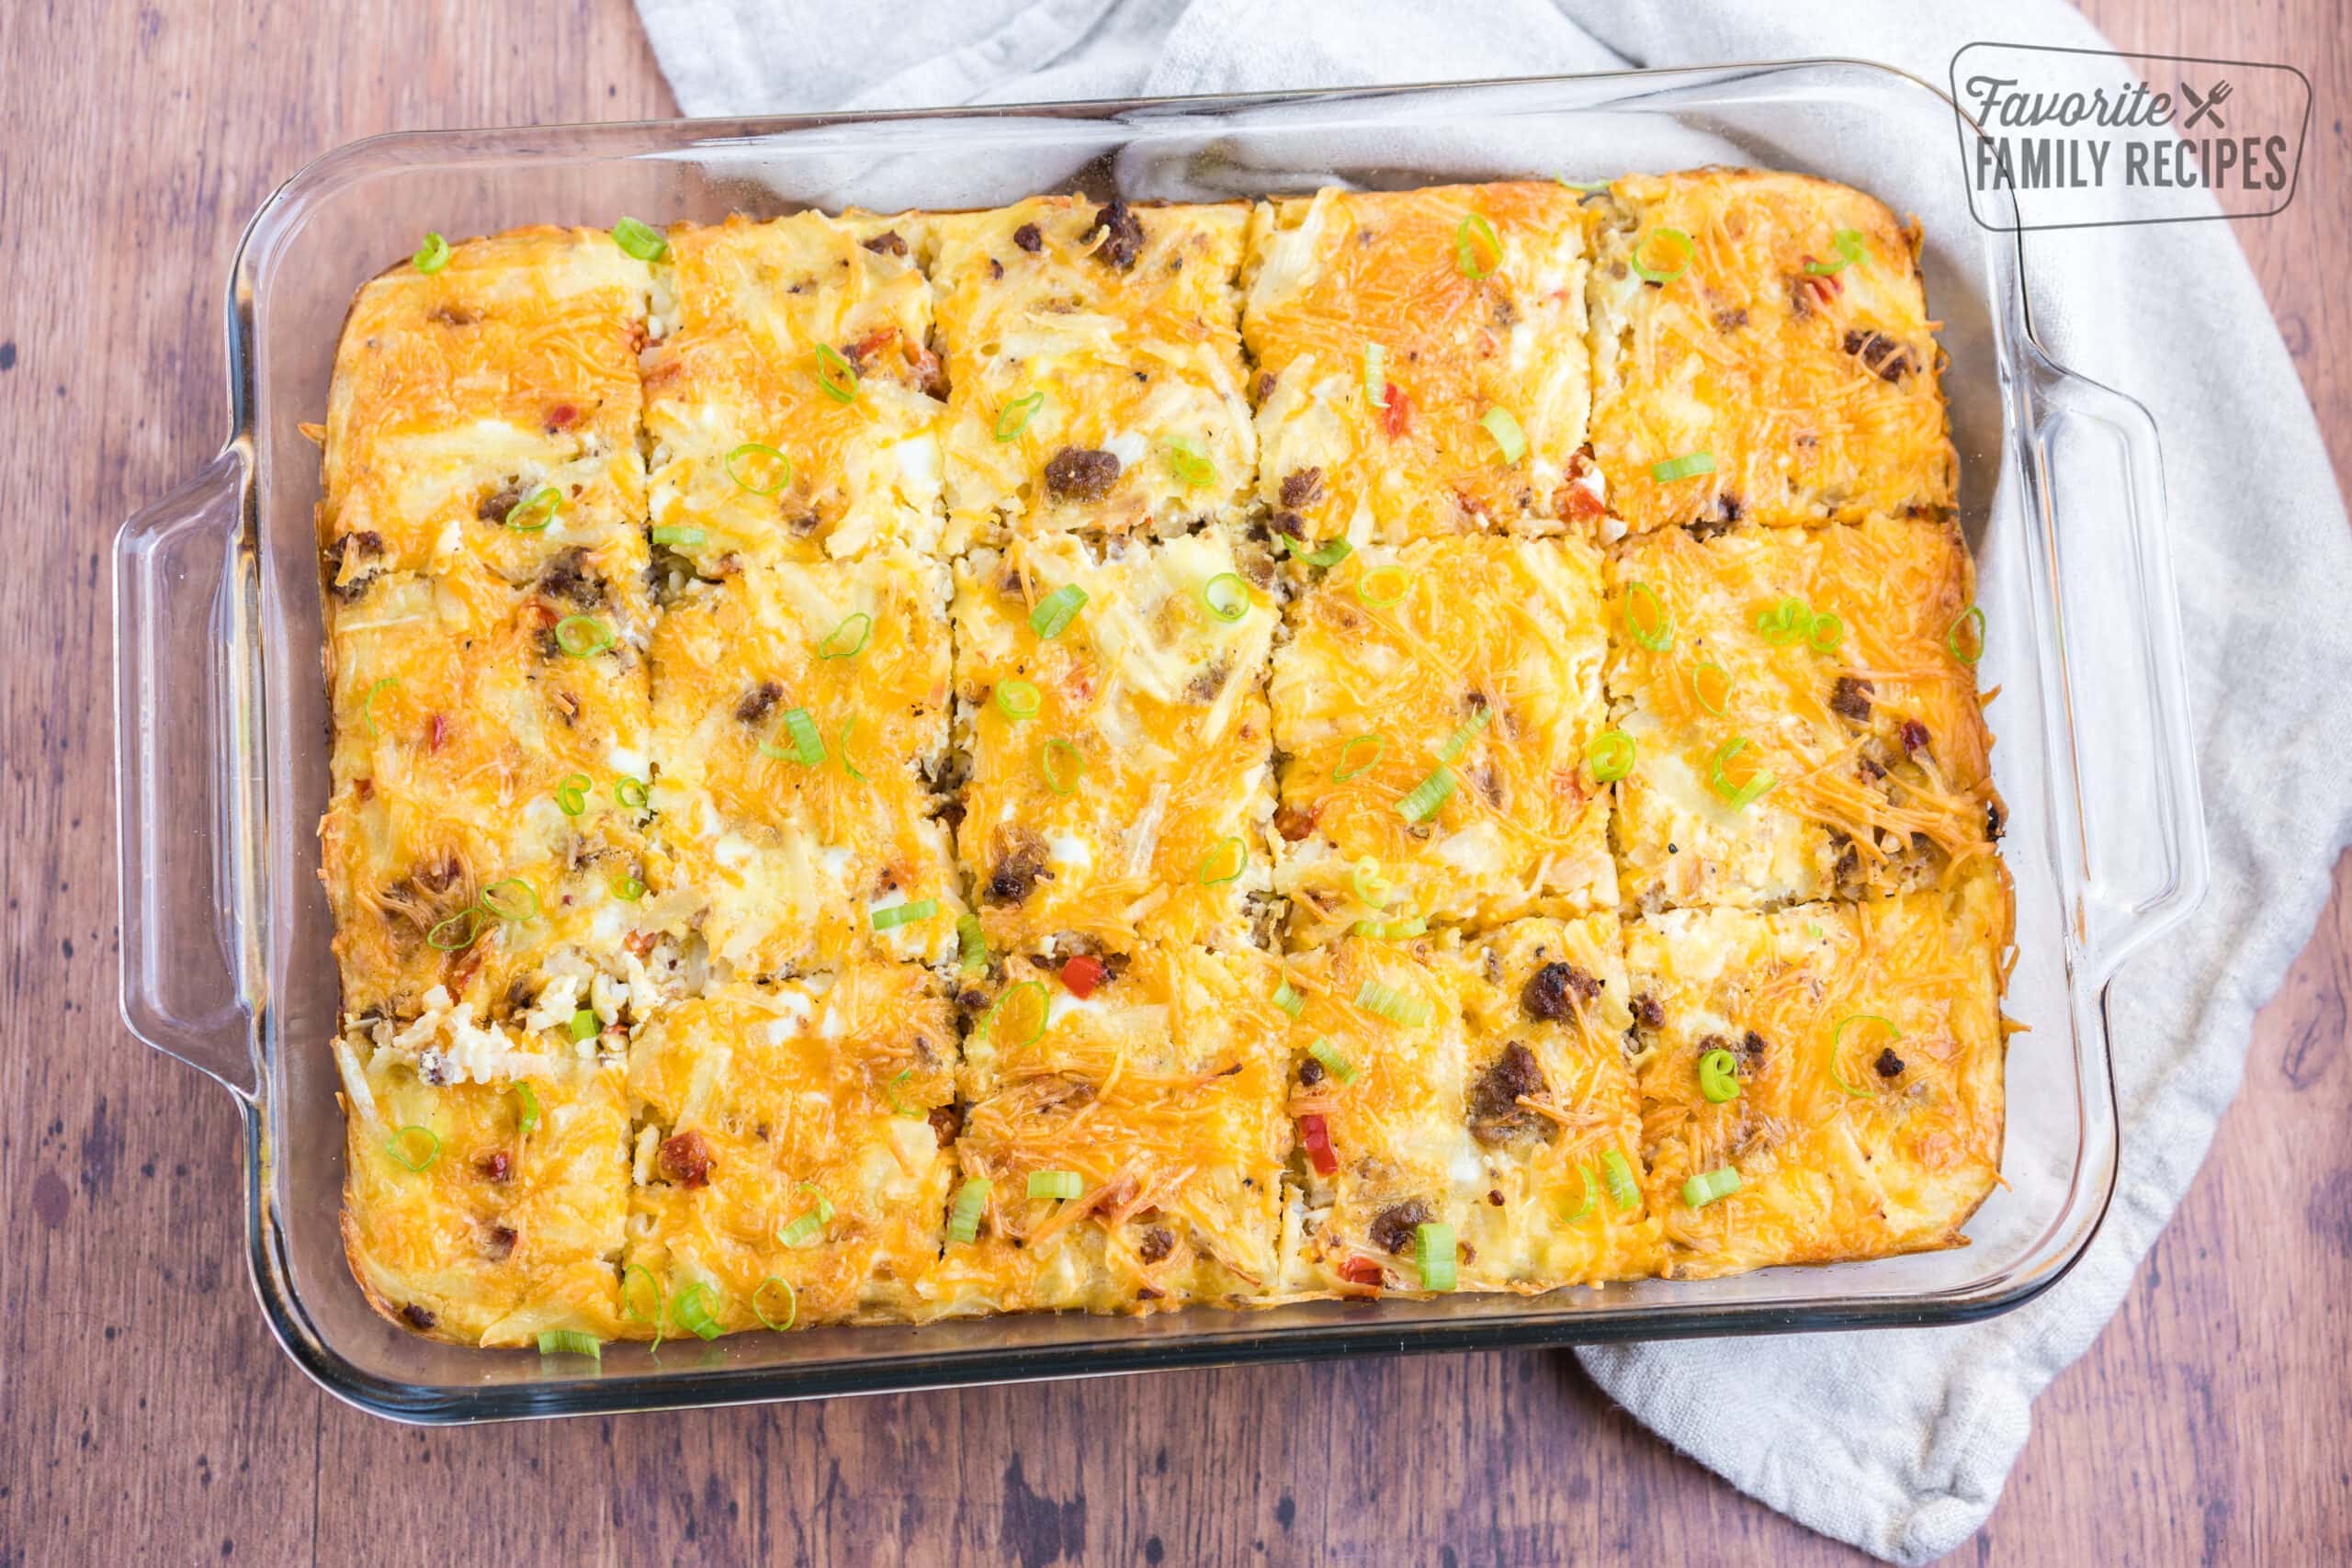 Breakfast casserole in a glass baking pan with eggs, hash browns, sausage, cheese, peppers, and green onion.